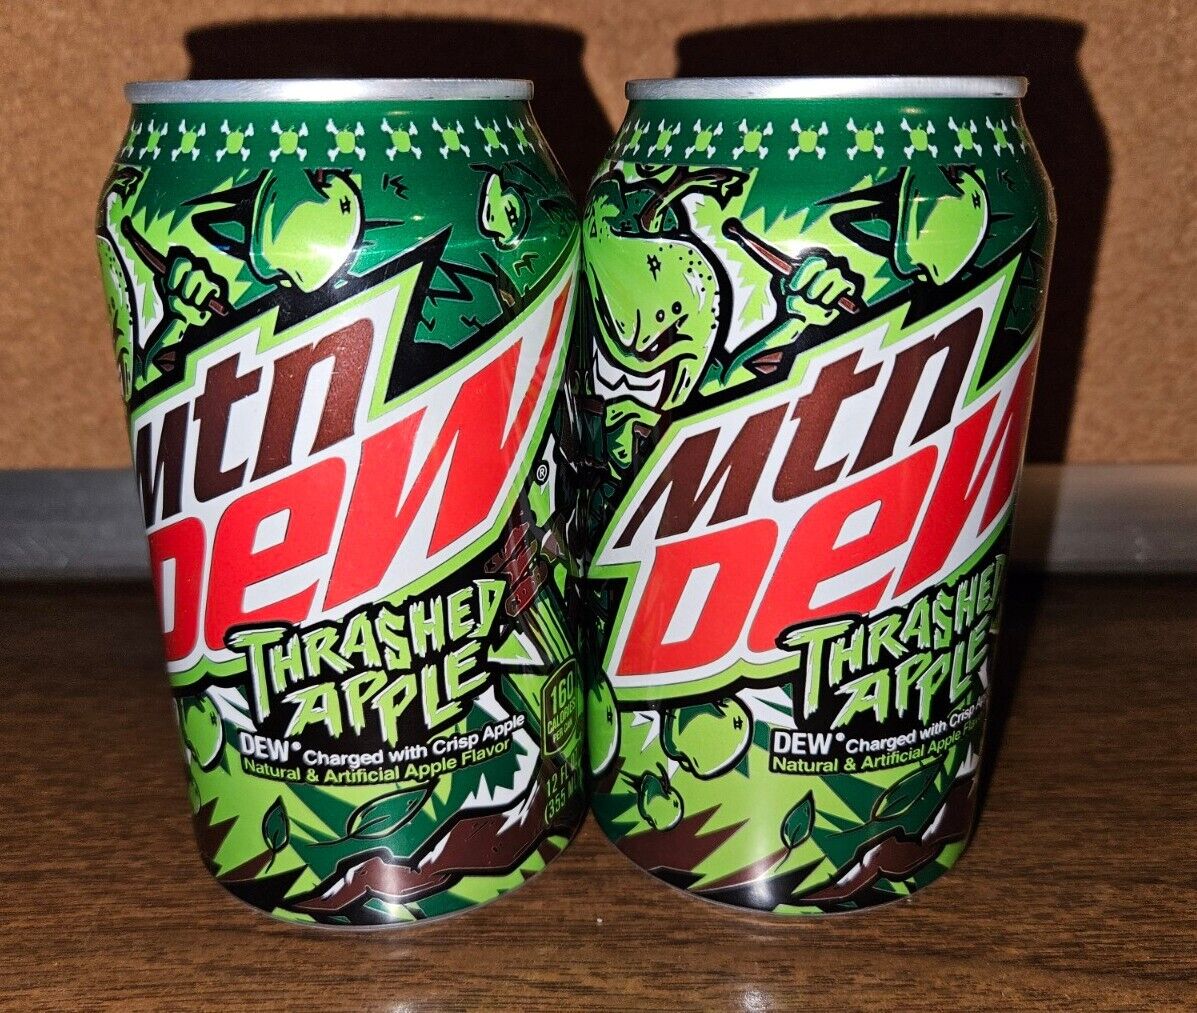 2x Unopened Mountain Dew MTN Dew Thrashed Apple charged 12oz Can Green - Kroger